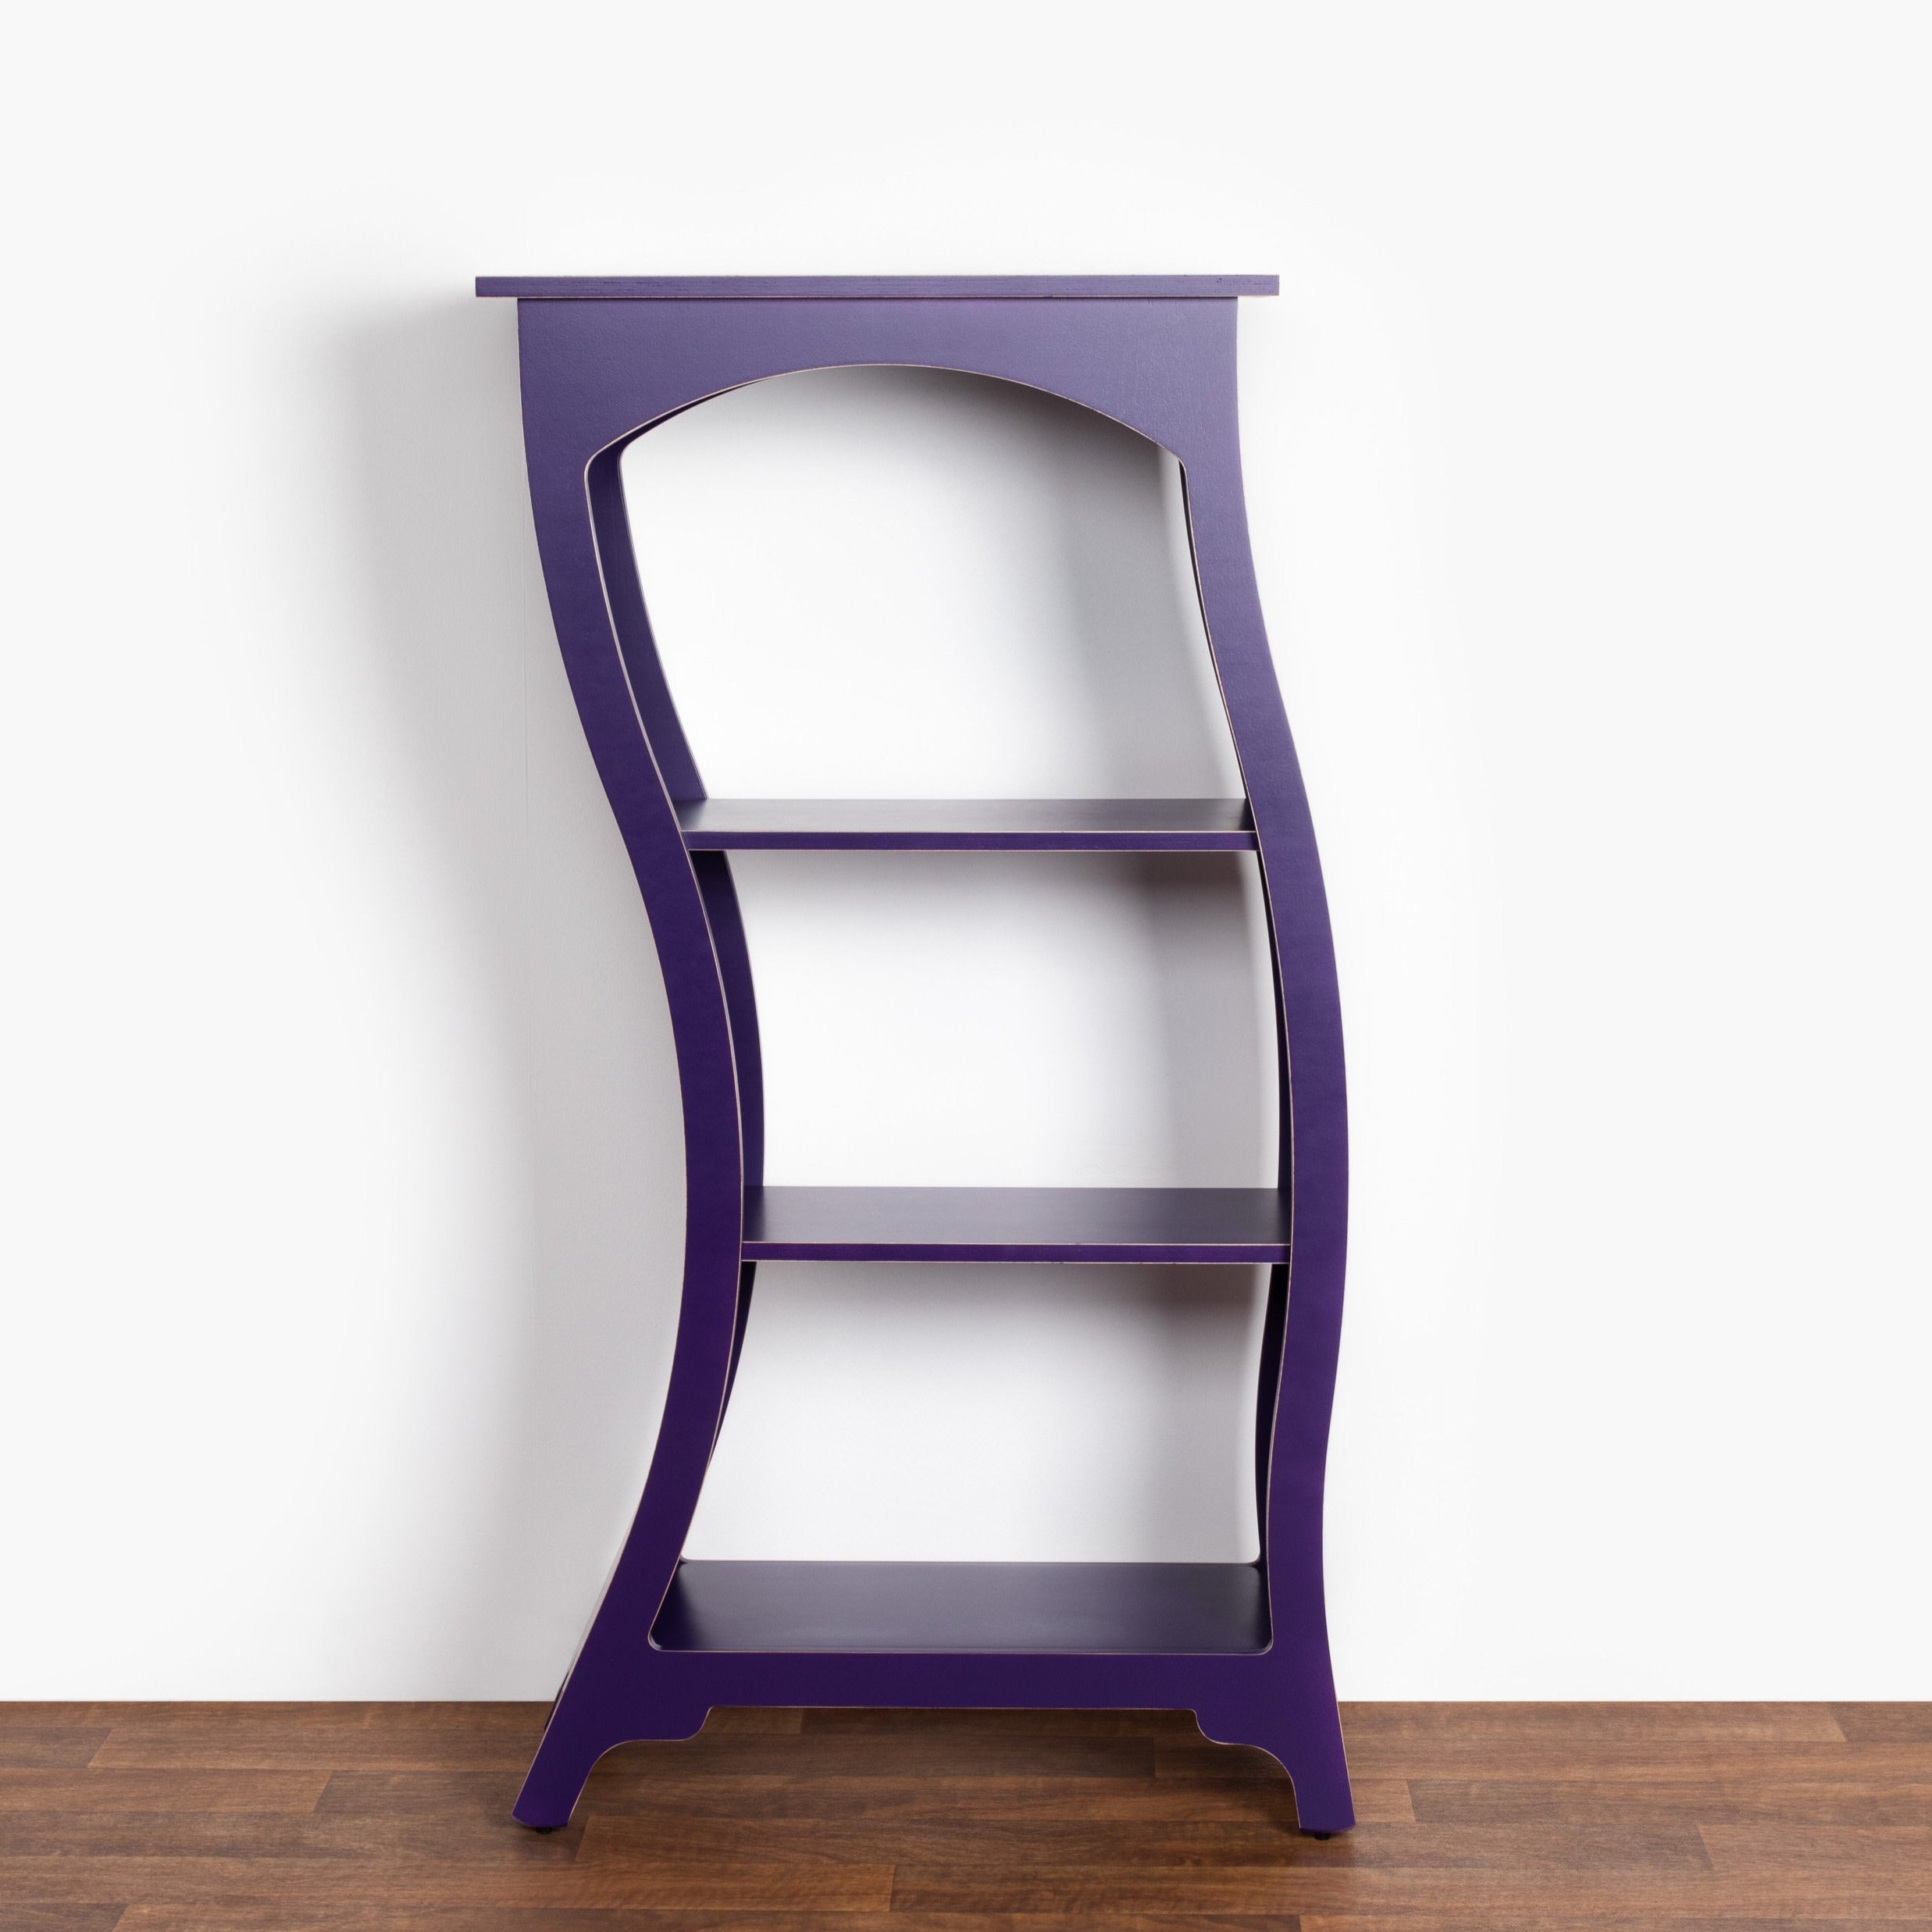 The Windle Bookcase